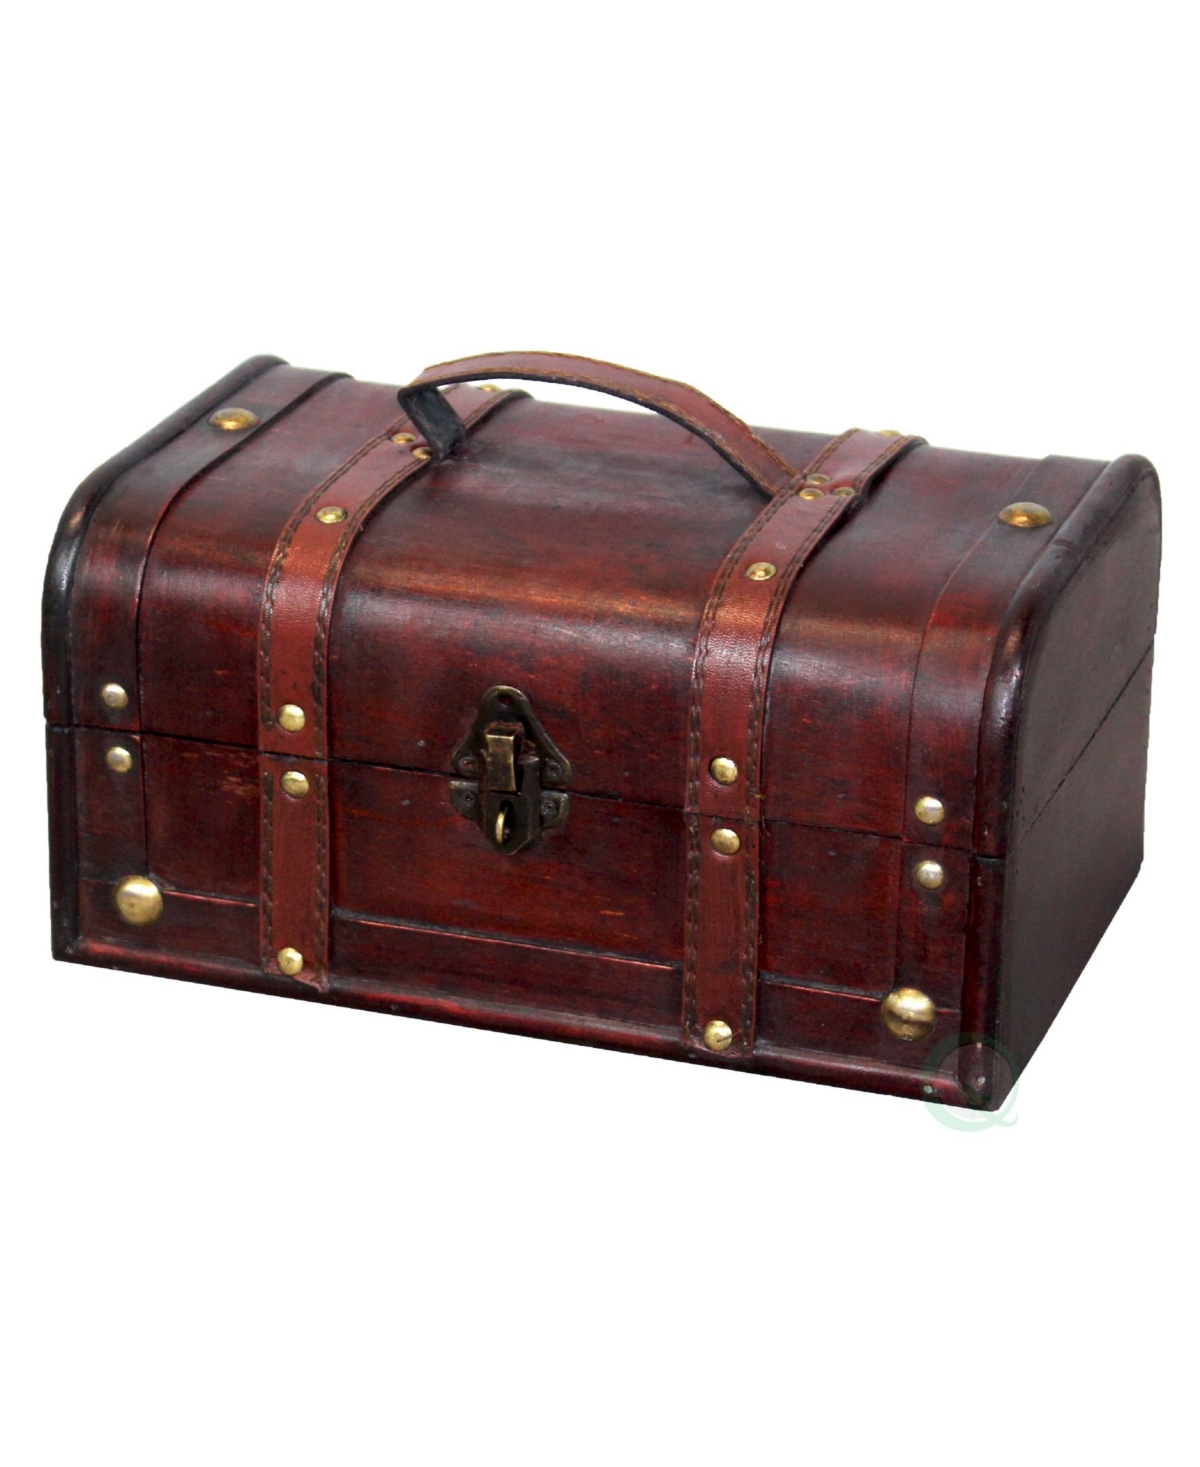 Vintiquewise Decorative Vintage-like Wood Treasure Box - Wooden Trunk Chest With Handle In Brown